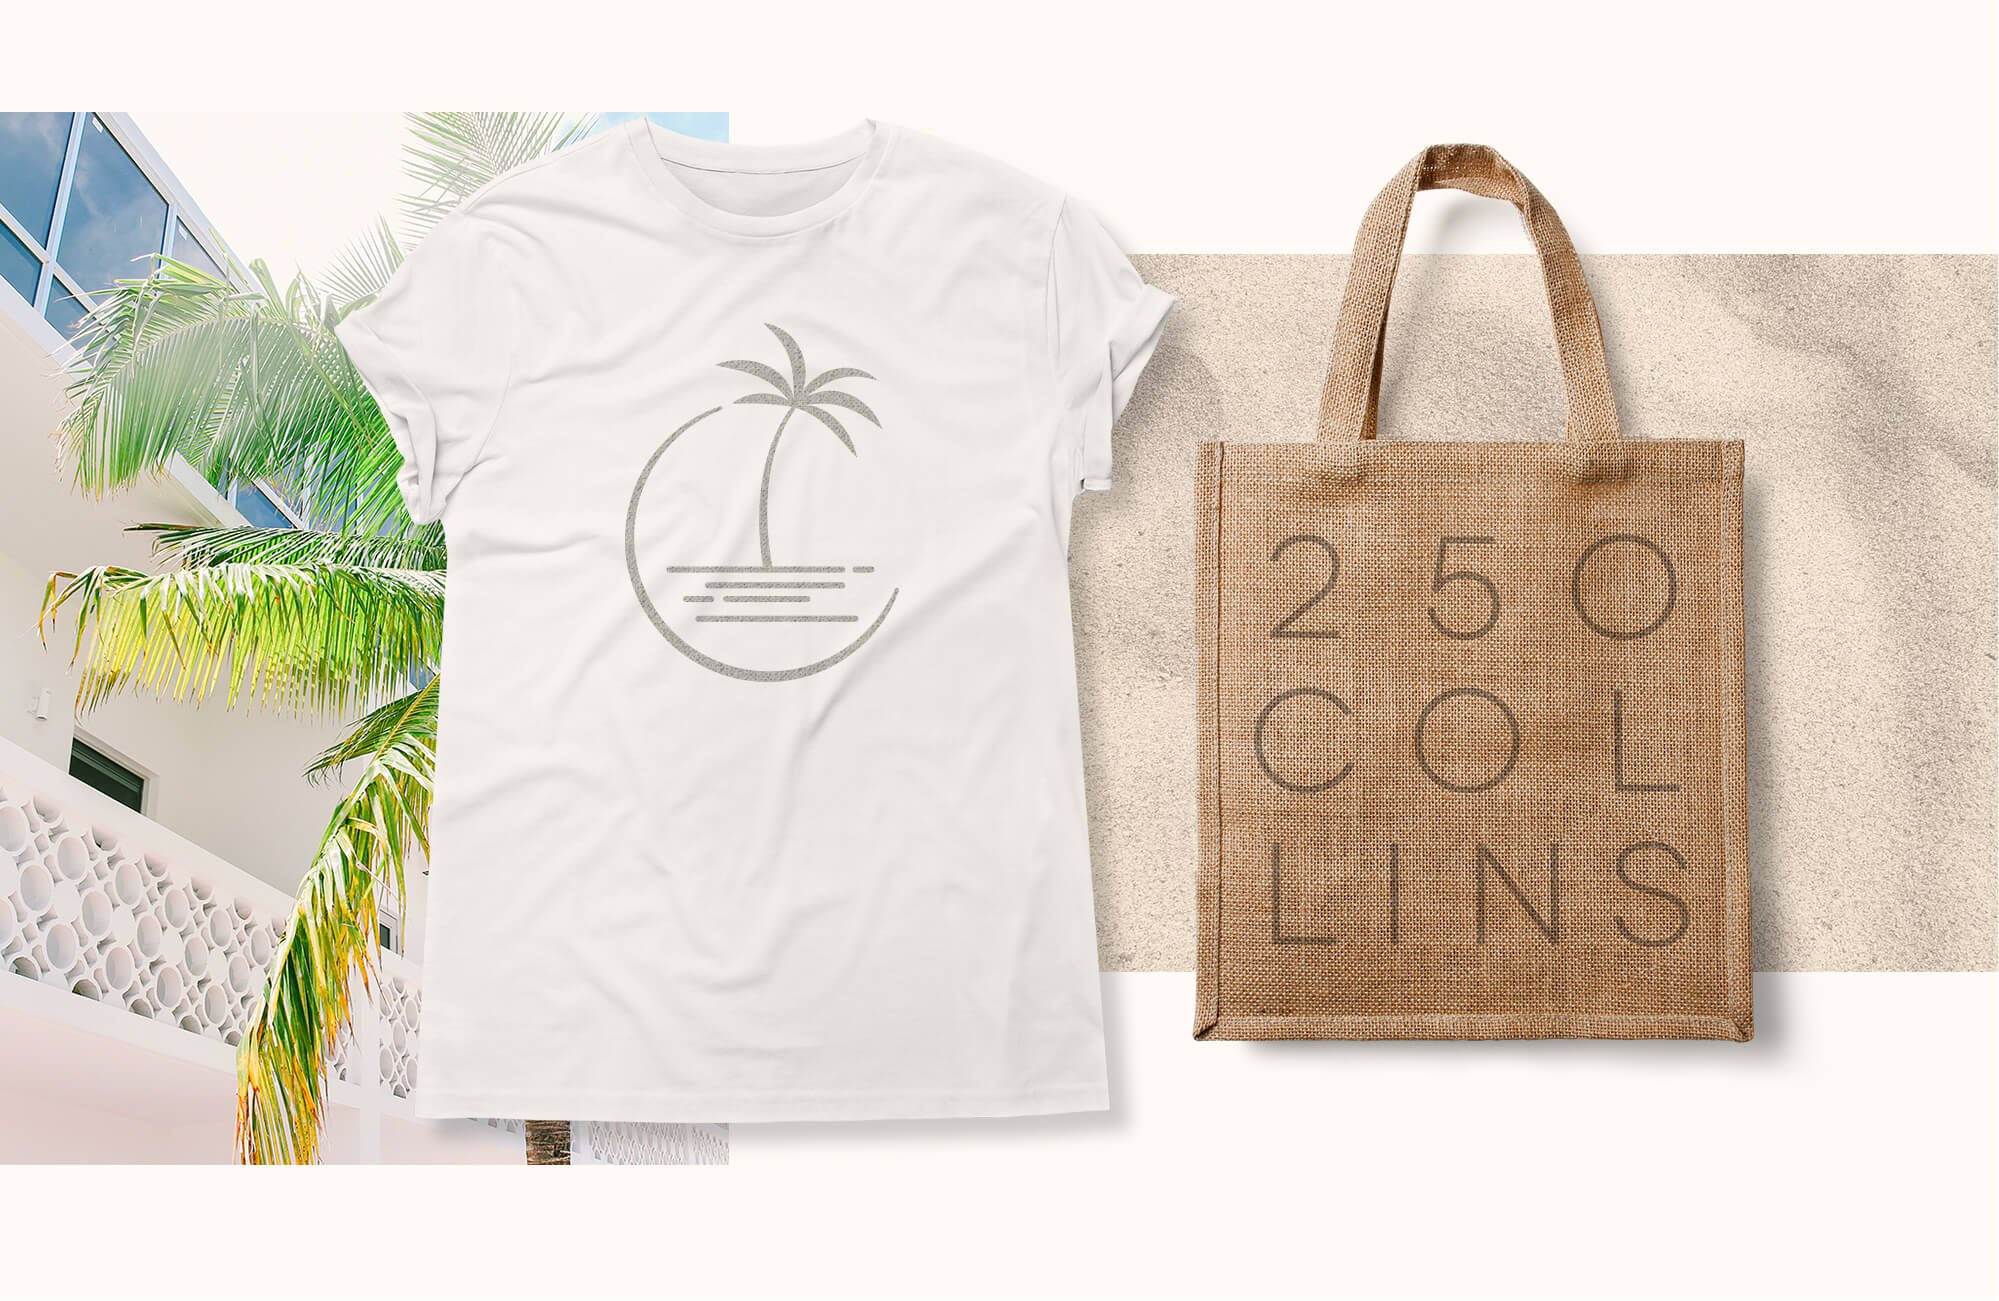 Jacober Creative Brand Identity for 250 Collins luxury apartments. Photo of apparel. Logo on a bag and tshirt.